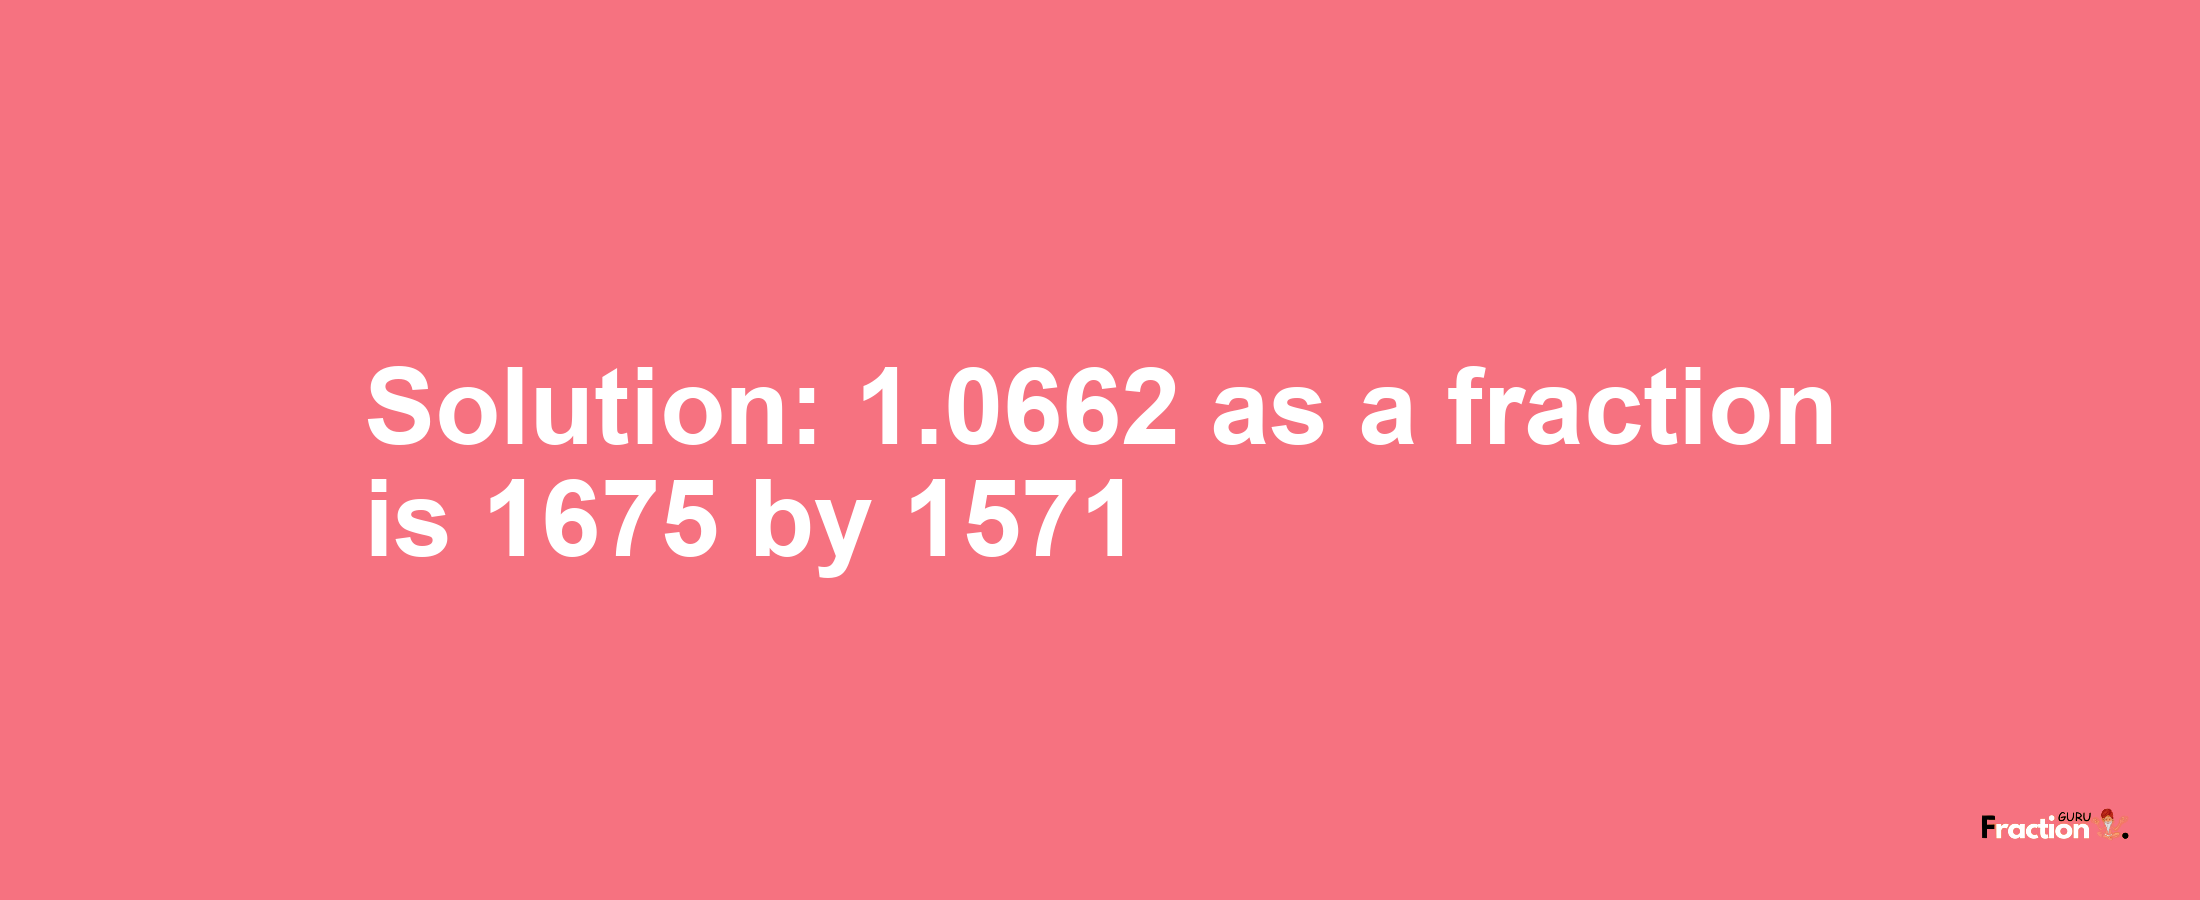 Solution:1.0662 as a fraction is 1675/1571